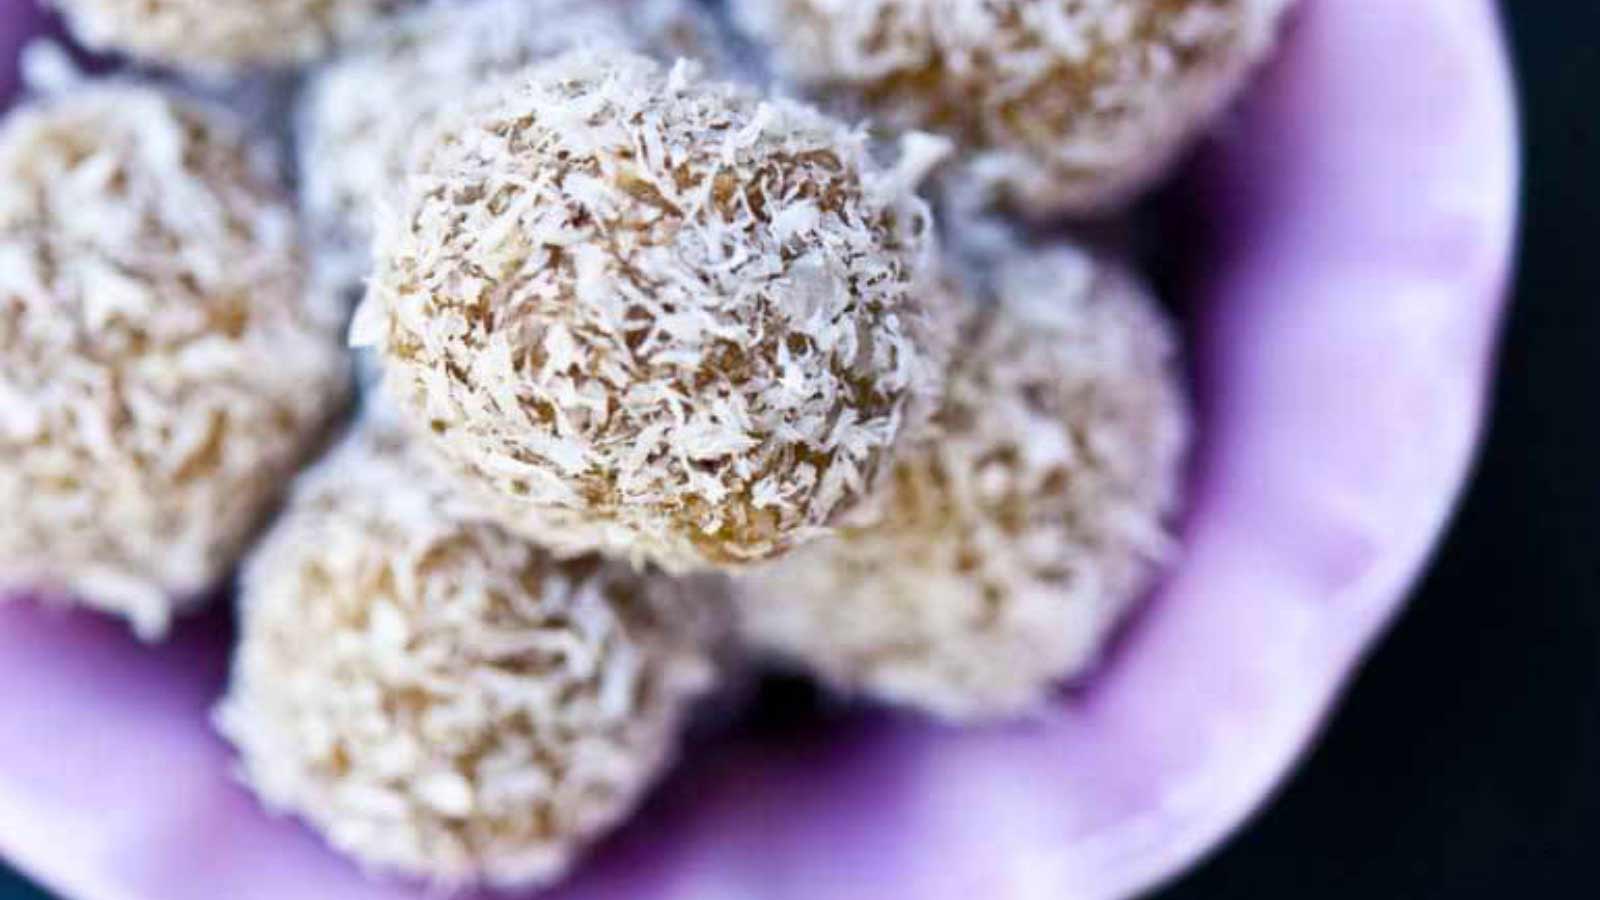 <p>Enjoy the perfect take-along snack with <a href="https://www.thegraciouspantry.com/clean-eating-jum-jills/">energy balls</a>. Store them in the fridge and pack them in a small bag. They can be kept in the fridge or in your desk drawer all day long. While you will want to return them to the fridge at the end of the day, chances are, there won’t be any left to store. These are yummy.</p>